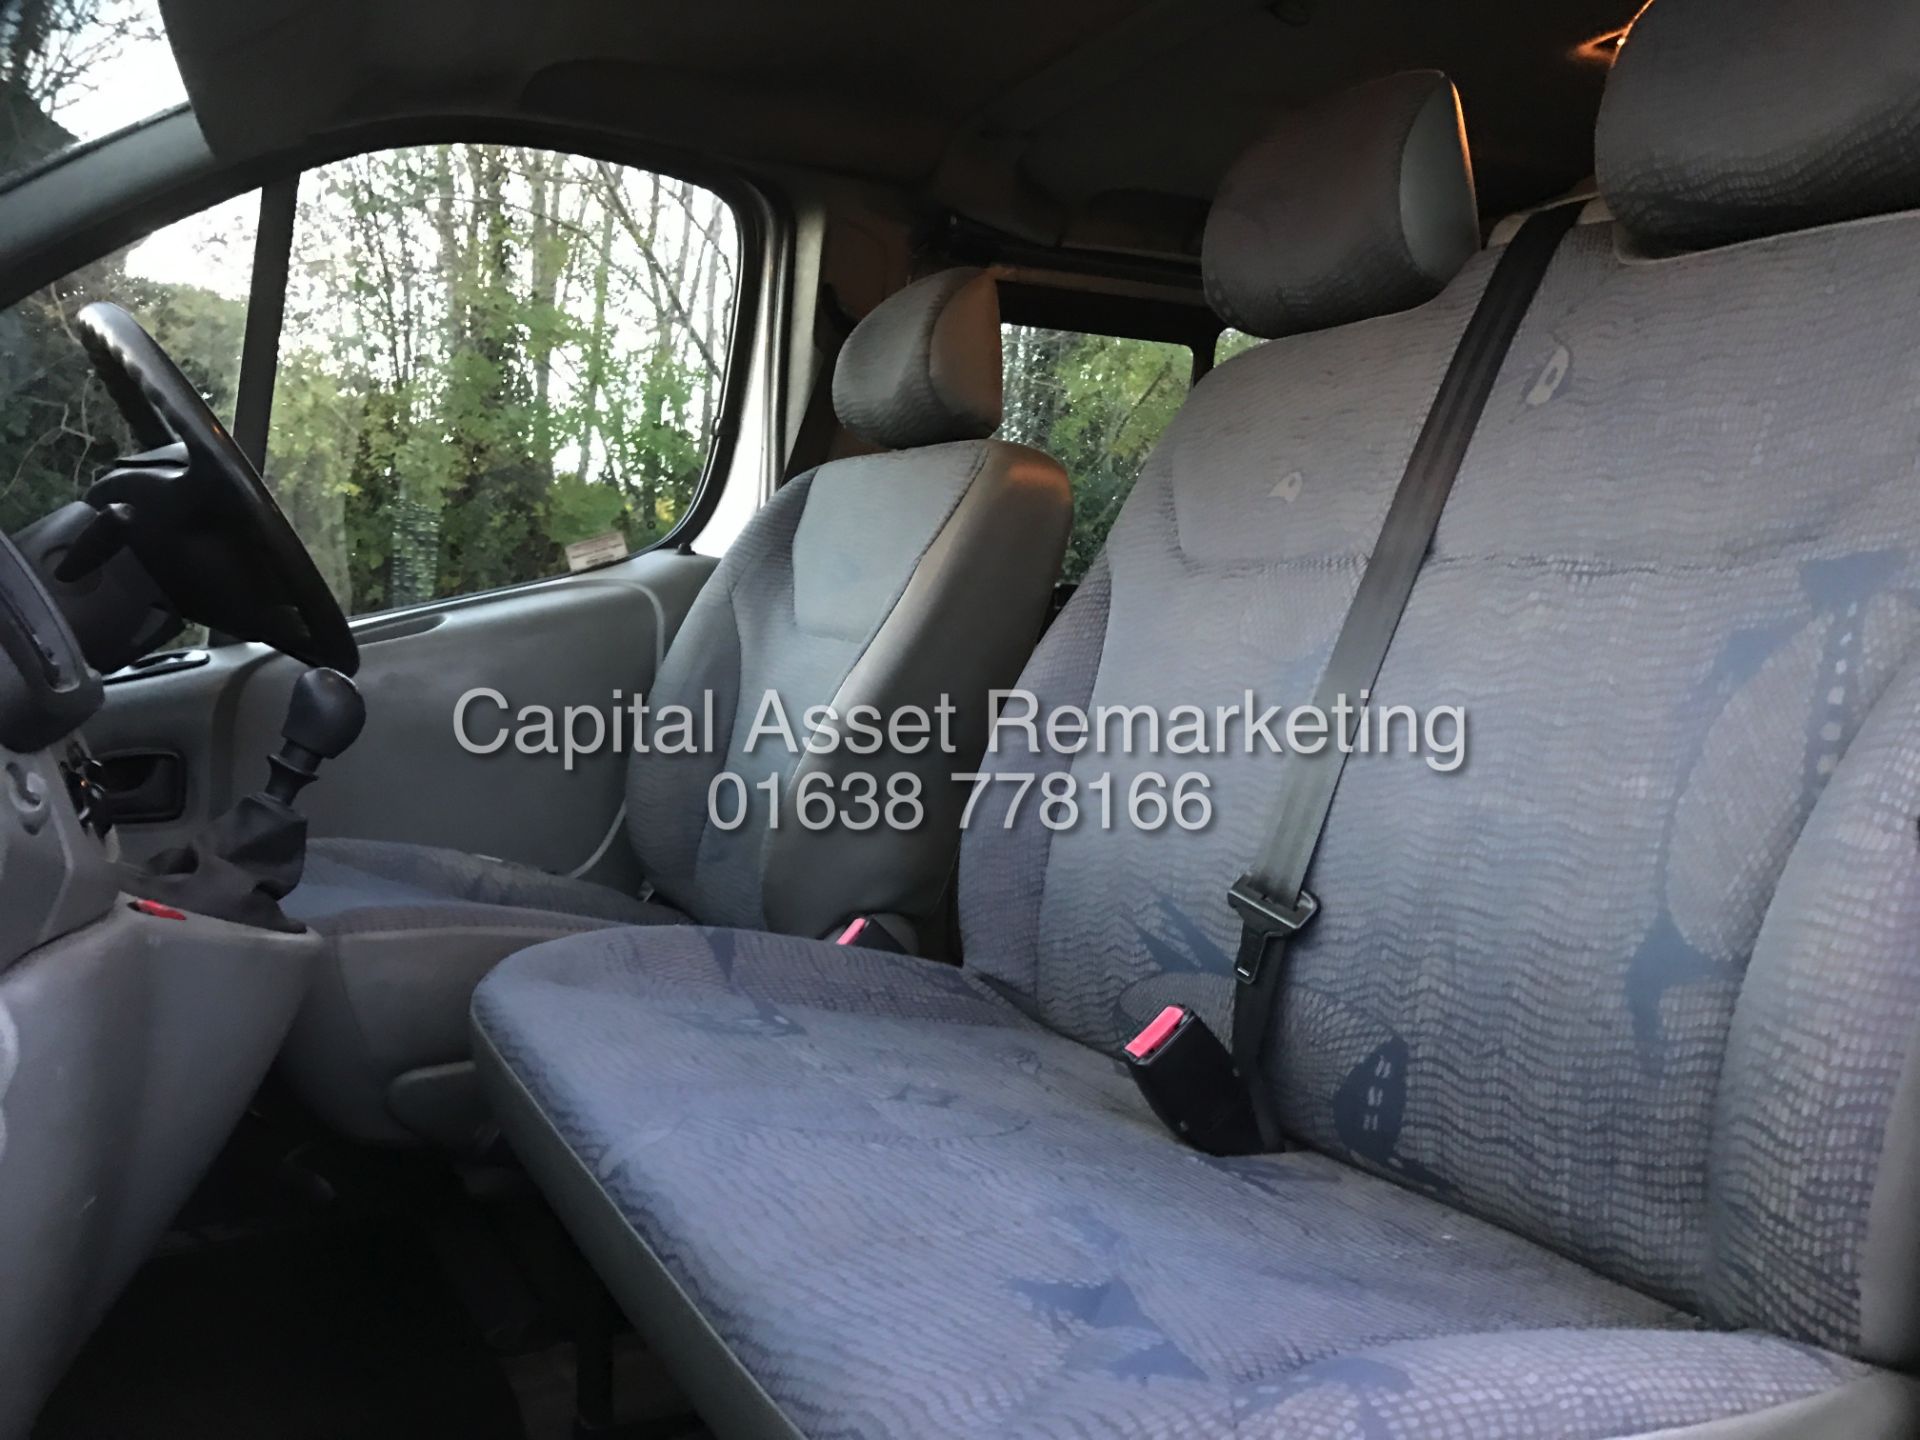 On Sale RENAULT TRAFIC 1.9DCI LONG WHEEL BASE DUELINER 6 SEATER - 05 REG - SILVER - AIR CON - WOW!!! - Image 15 of 19